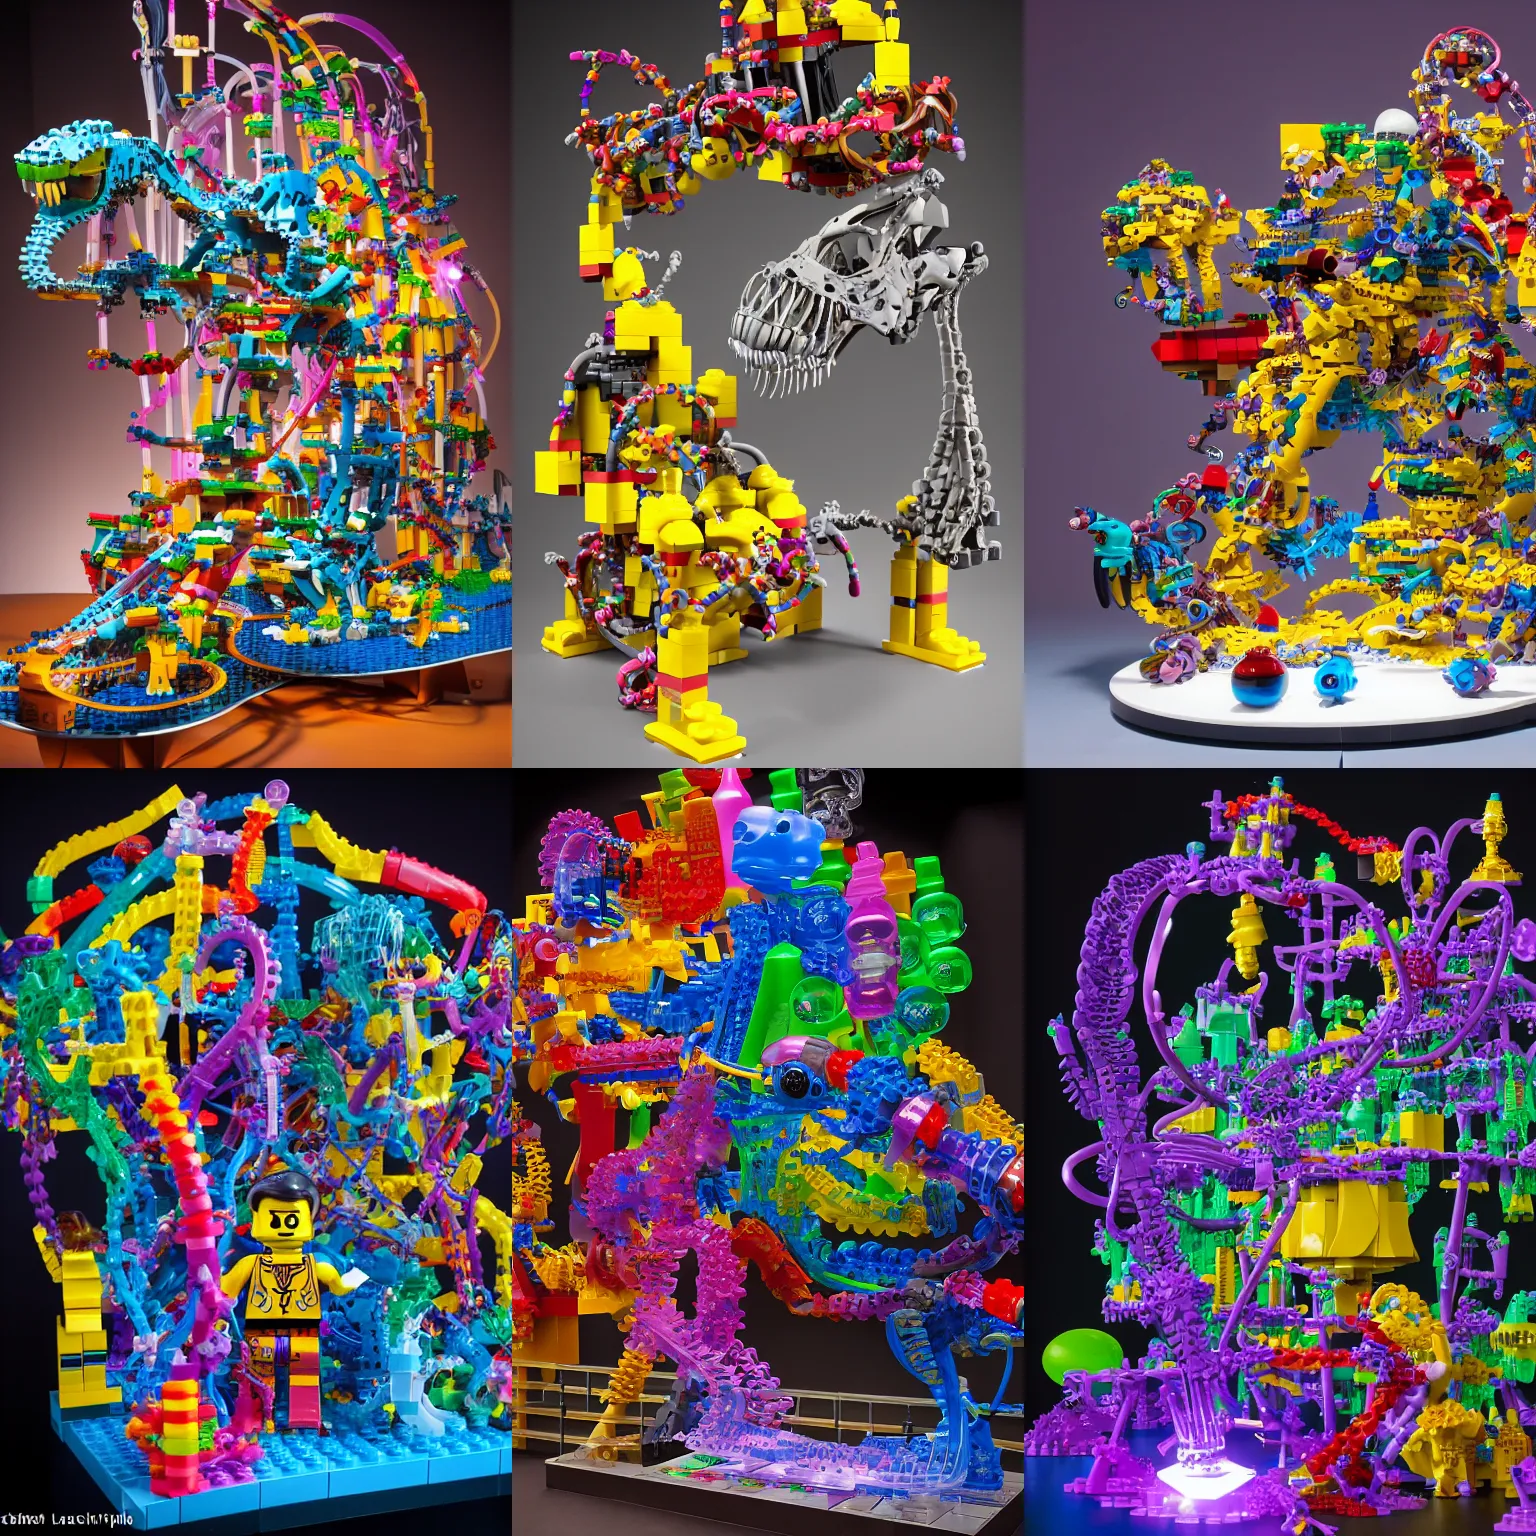 Prompt: pictoplasma, disney, pixar, dreamworks, electron microscopy Simple translucent mechanic bionic lego dinosaur skeleton dissection sculpture made from rollercoaster, with colorfull jellybeans organs, cables, wires and tubes, by david lachapelle, by angus mckie, by rhads, in a dark empty black studio hollow, c4d, at night, rimlight, rimight, rimlight